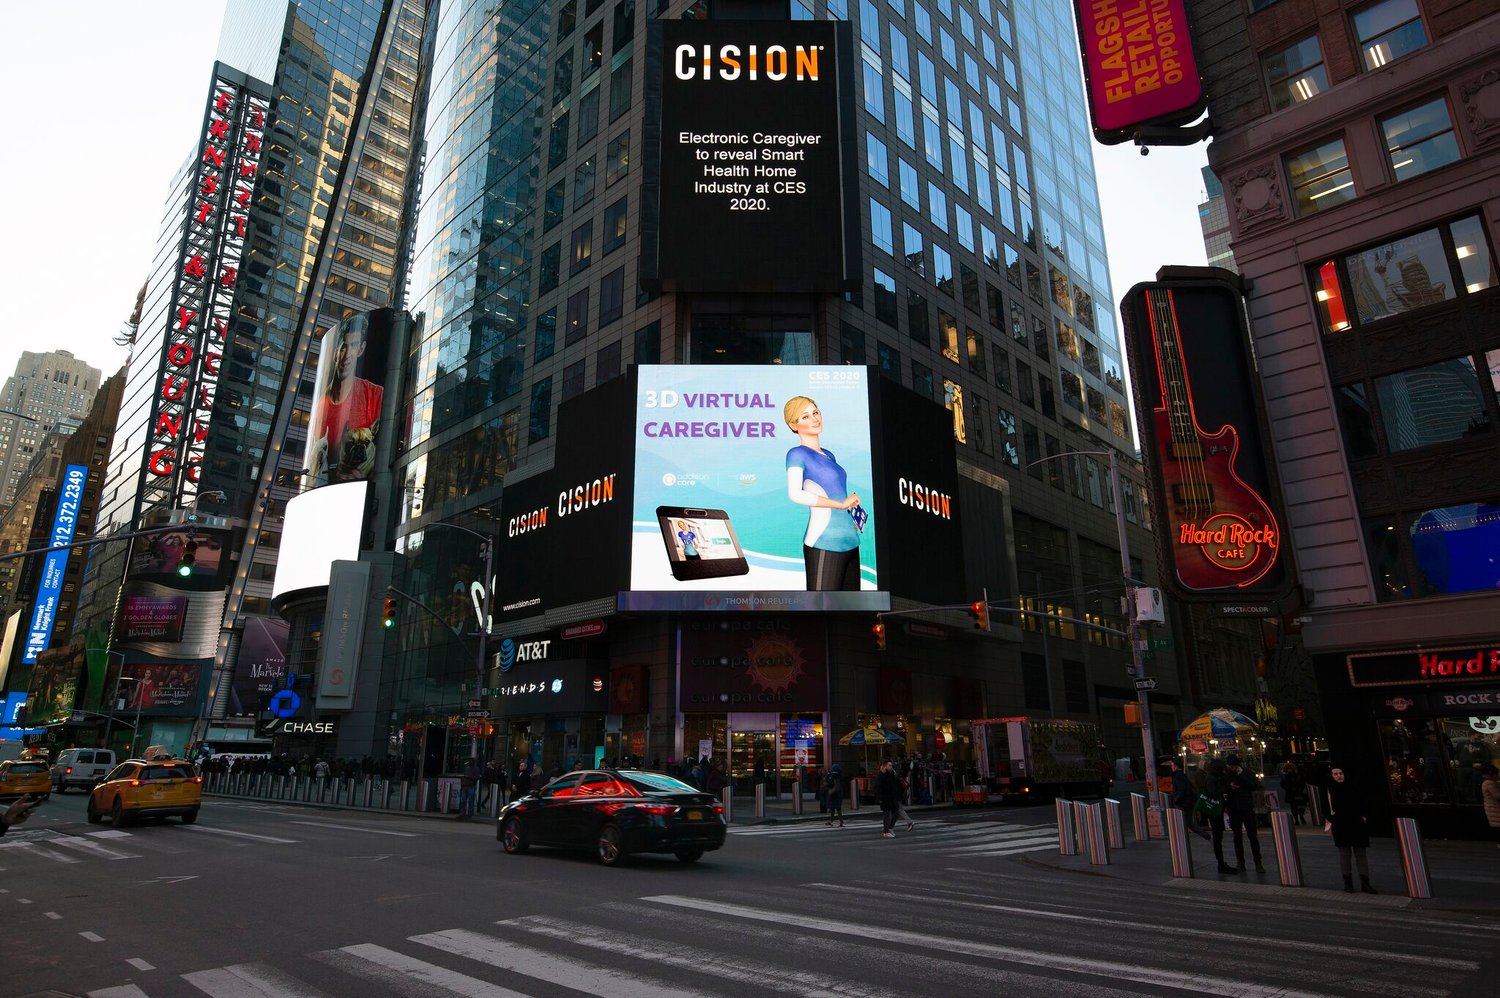 Electronic Caregiver Addison Care on display in Times Square, New York City